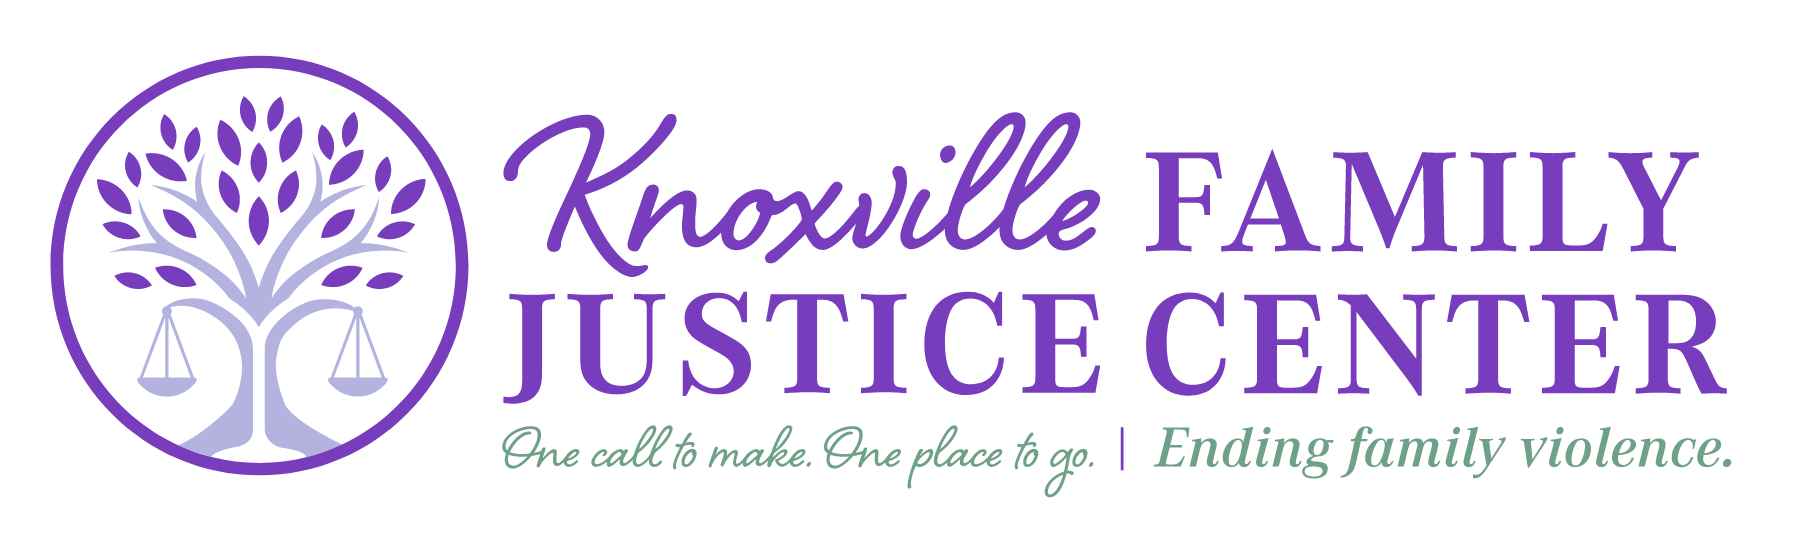 This image portrays Knoxville Family Justice Center by McNabb Center.